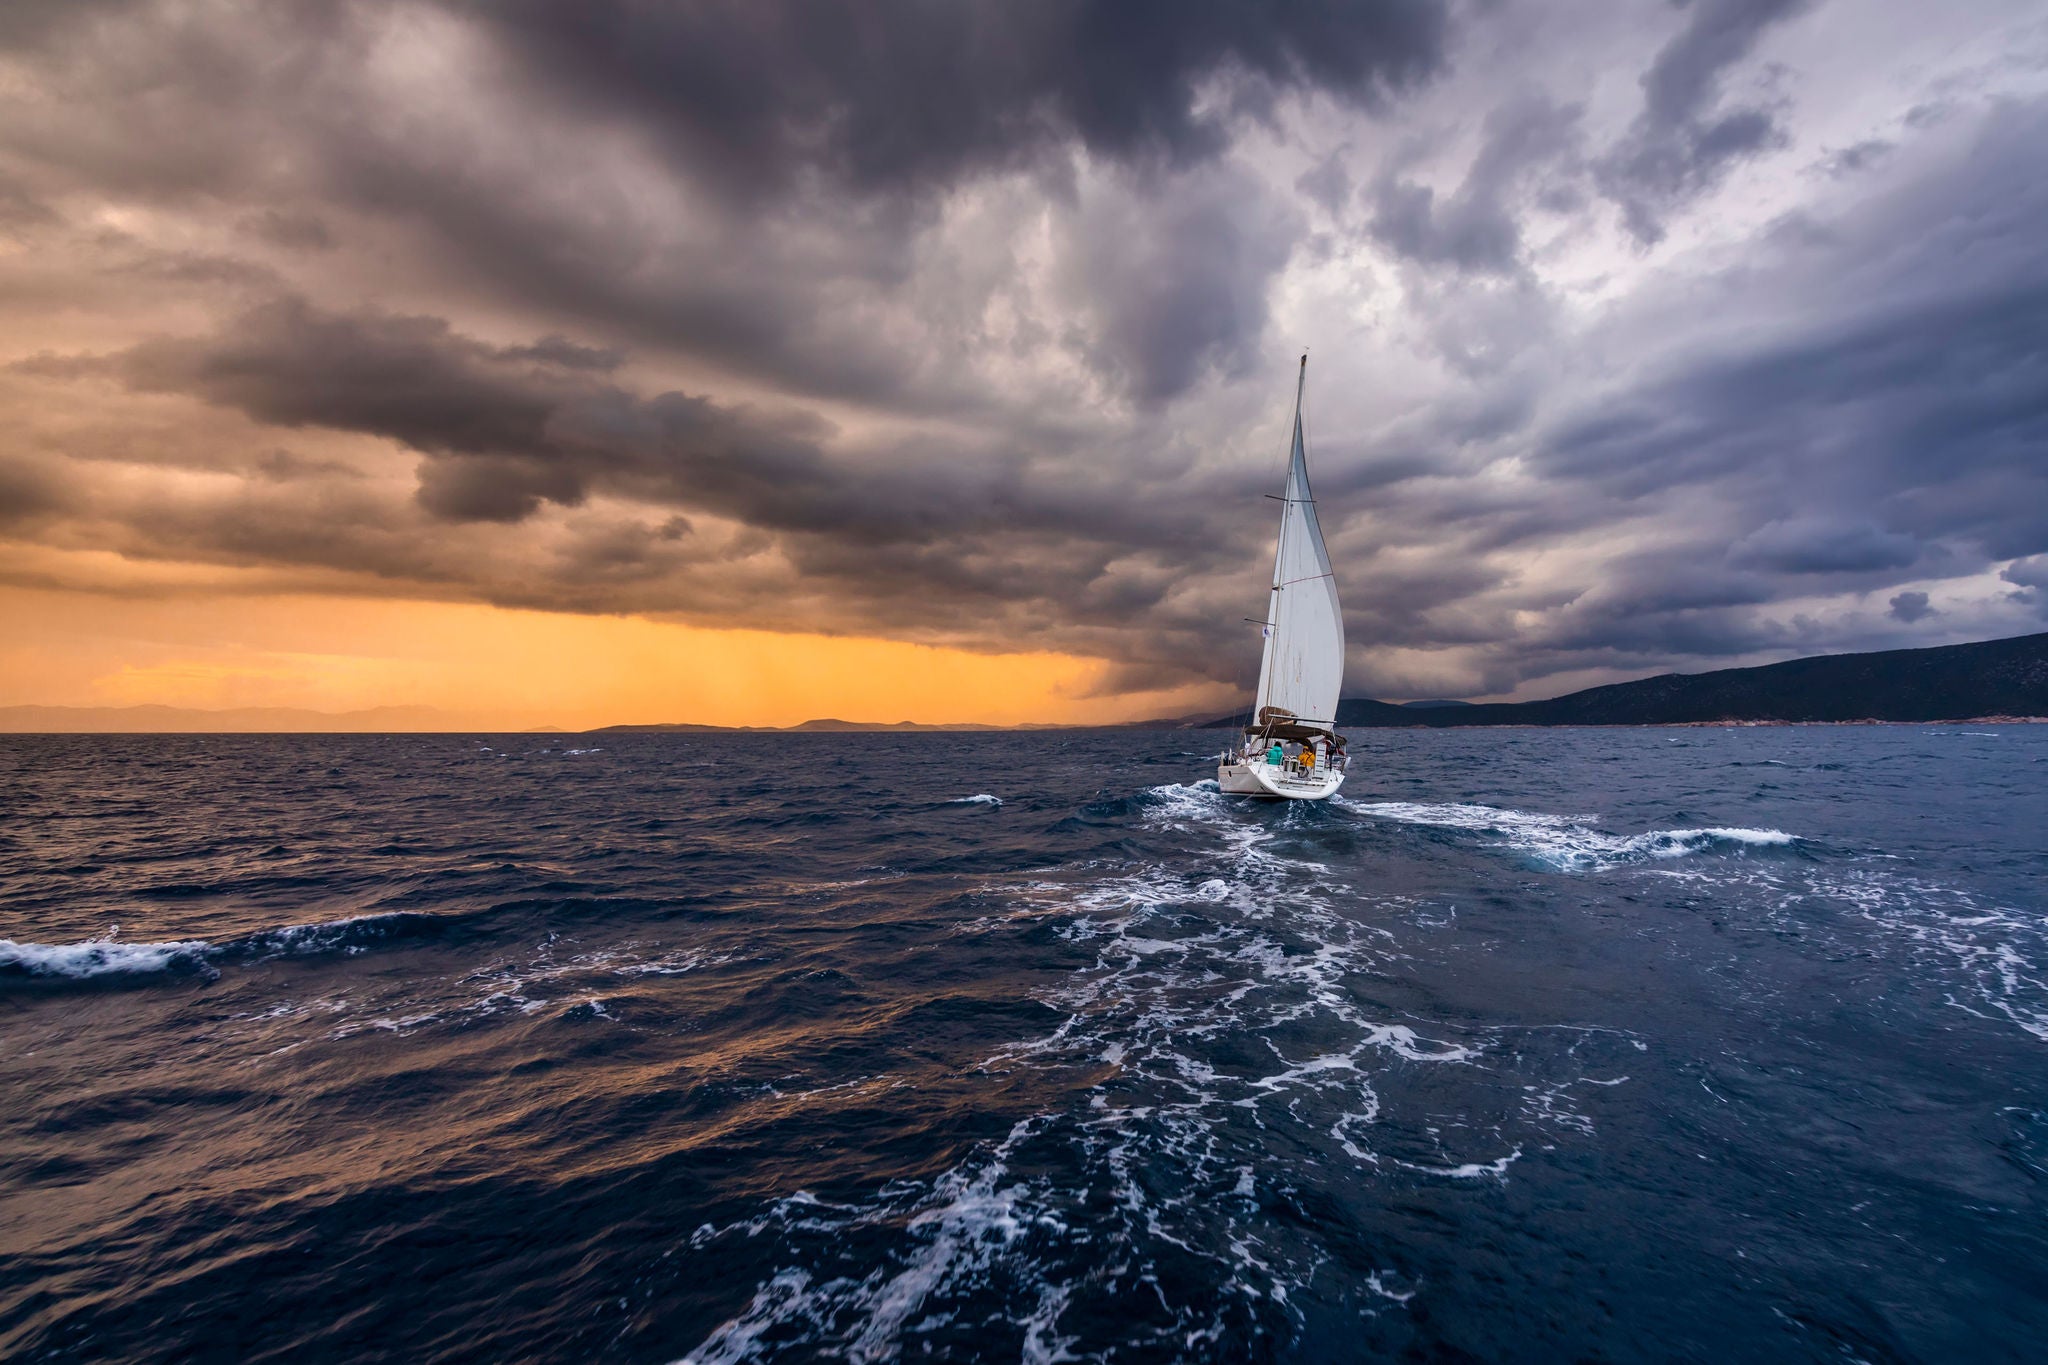 yatch with white sails on a background of storm cloud at sea